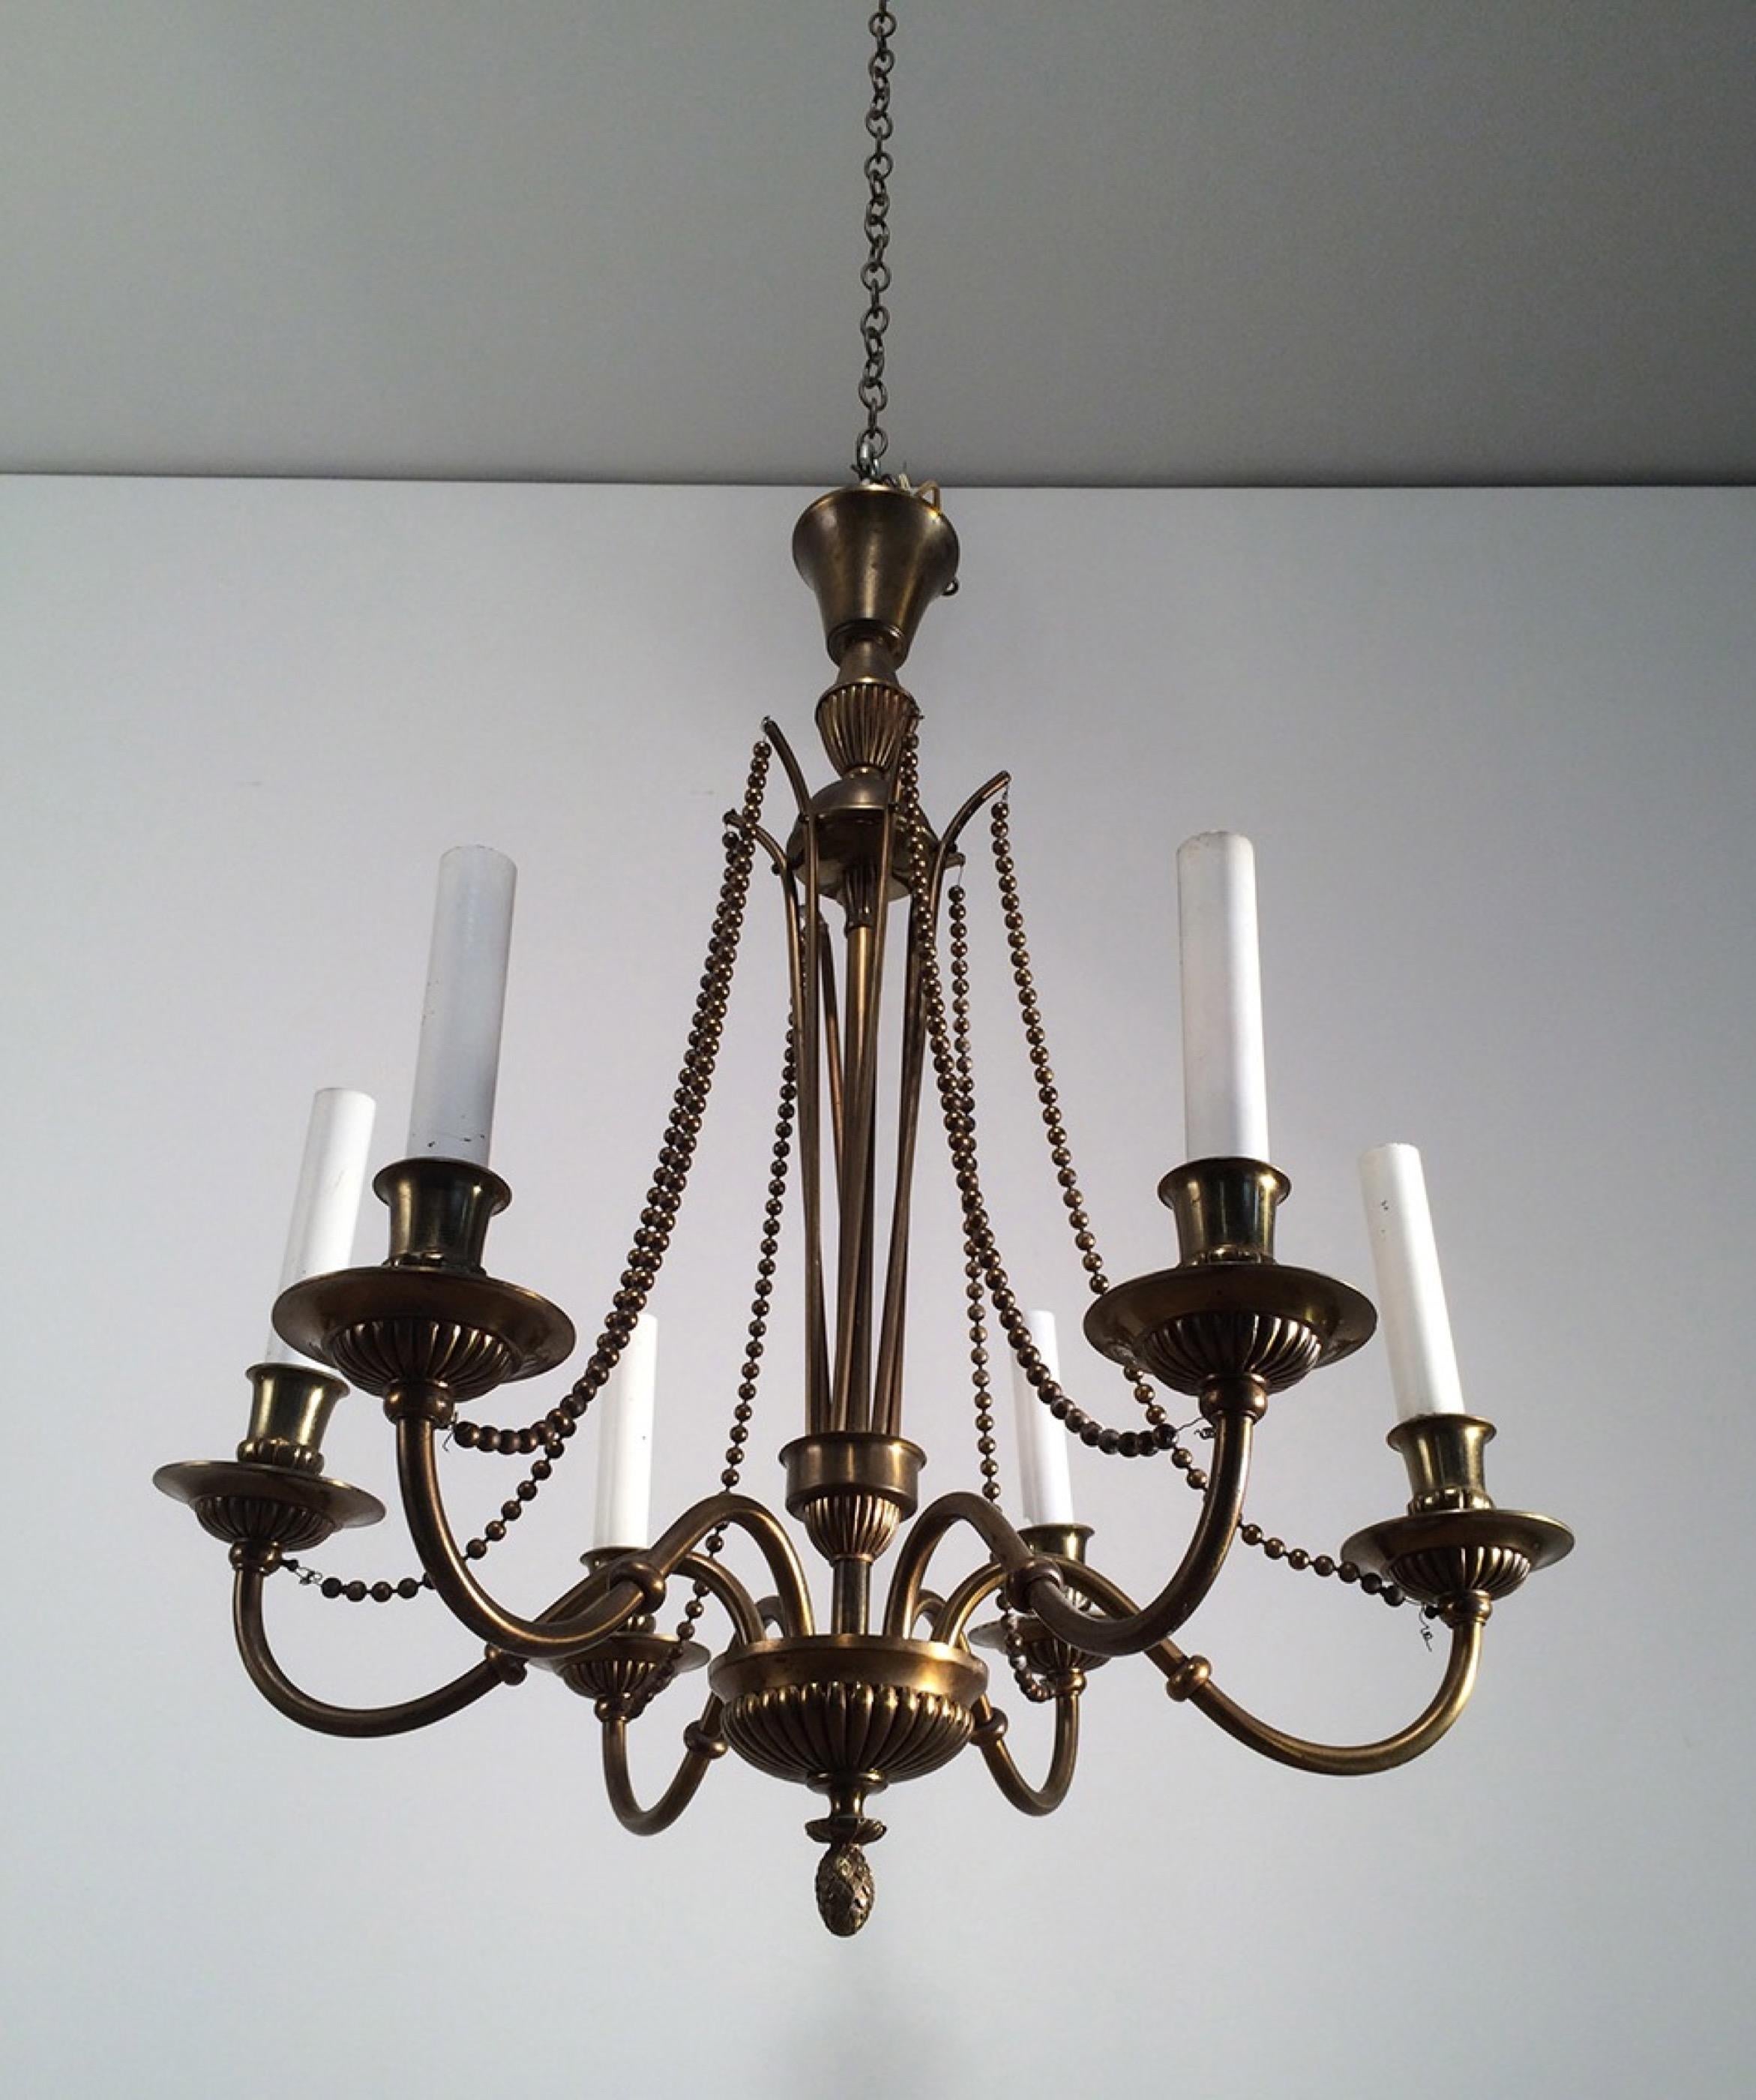 Mid-20th Century Neoclassical Brass and Bronze Chandelier, circa 1940